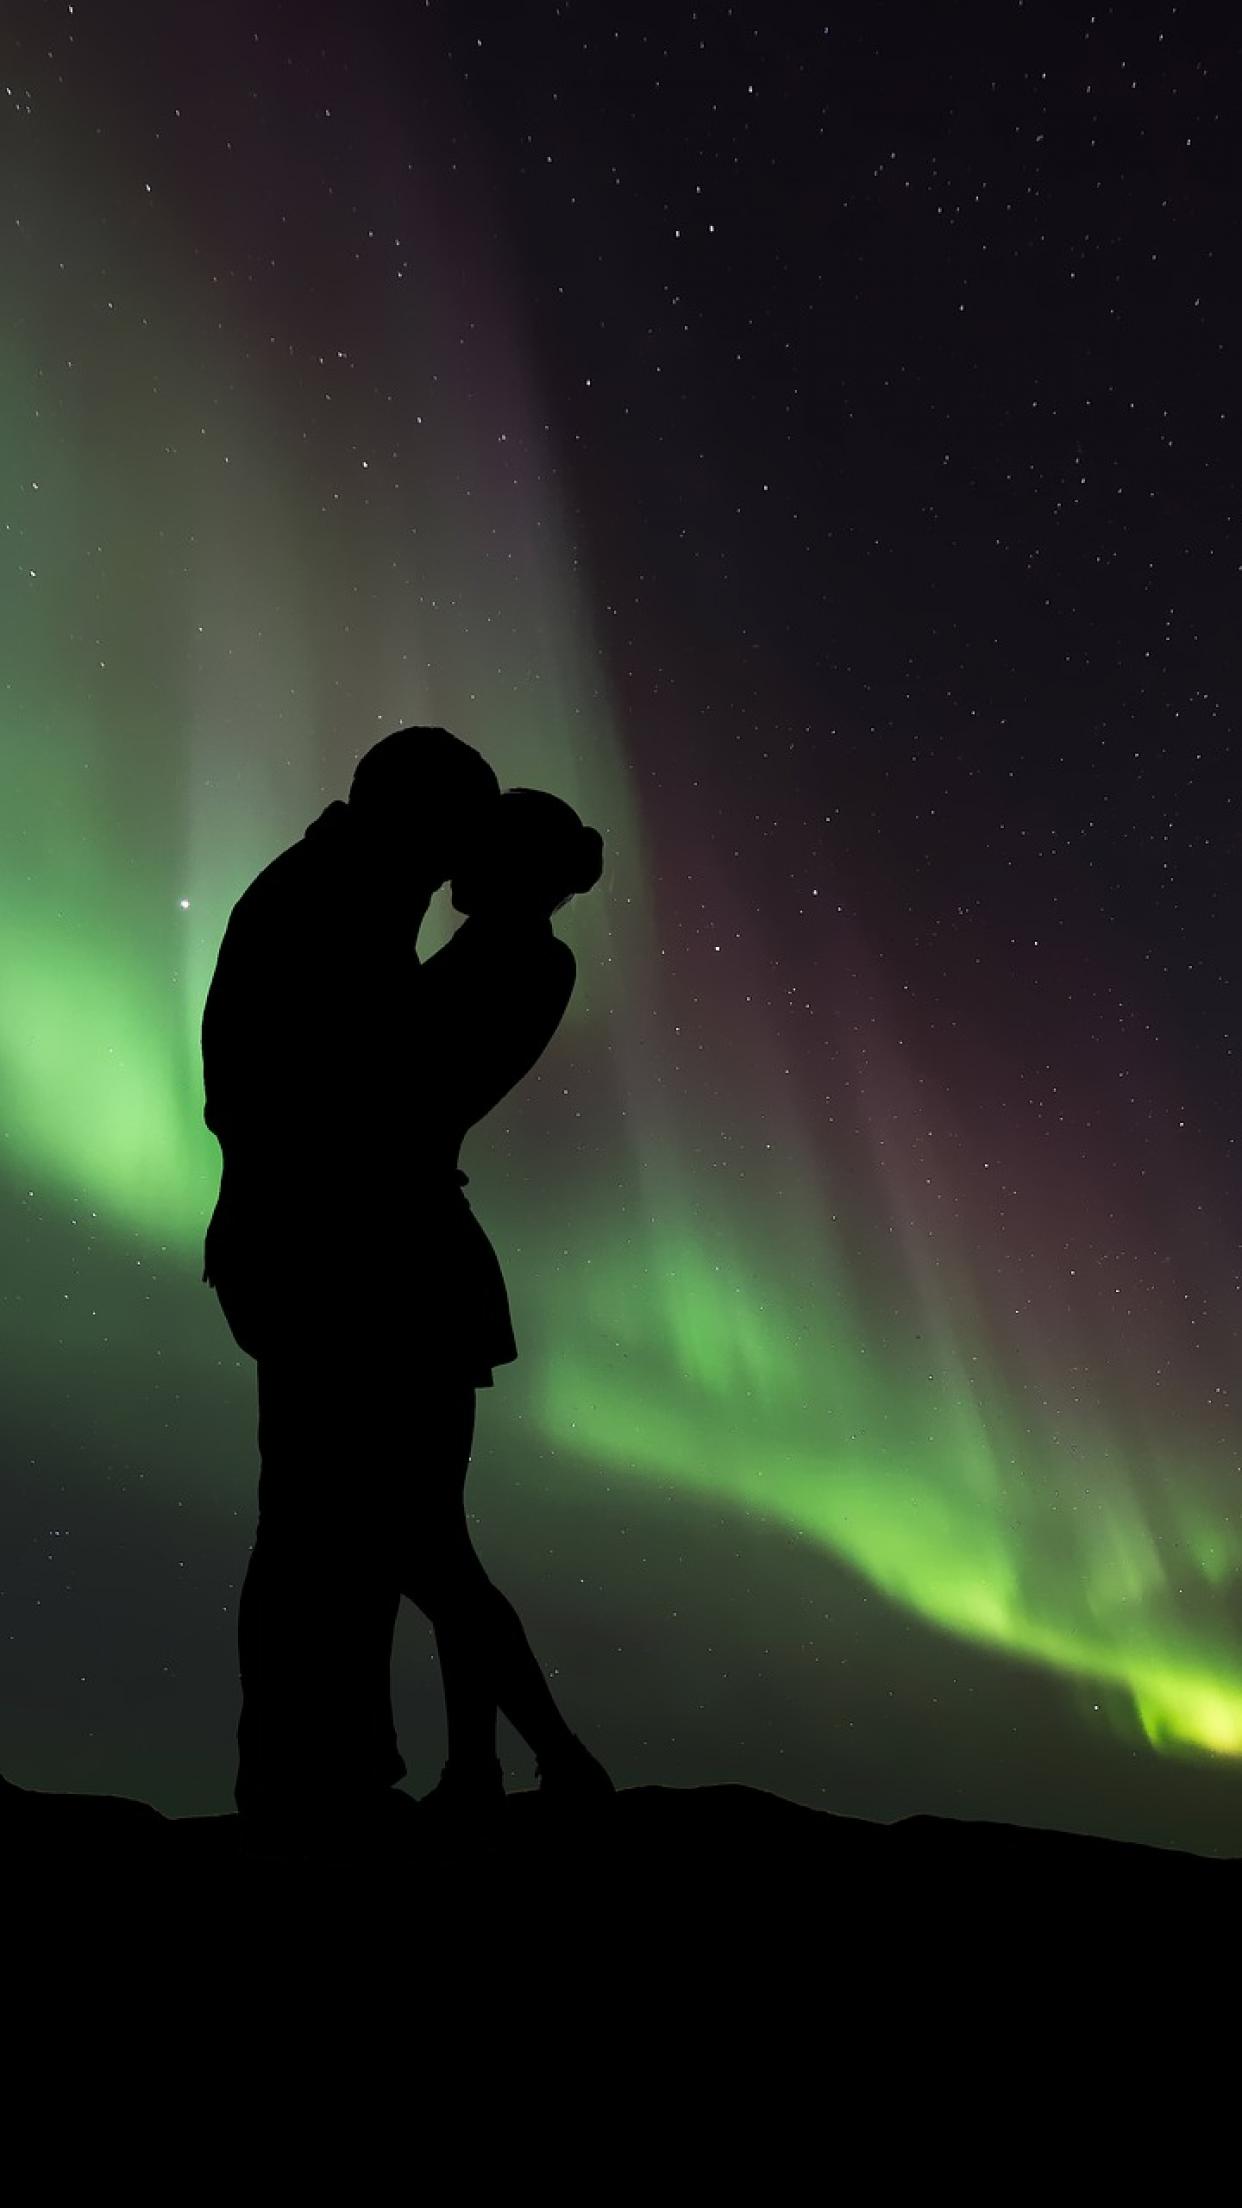 What A Moment Of Love - Silhouette Man Hugging Woman - HD Wallpaper 